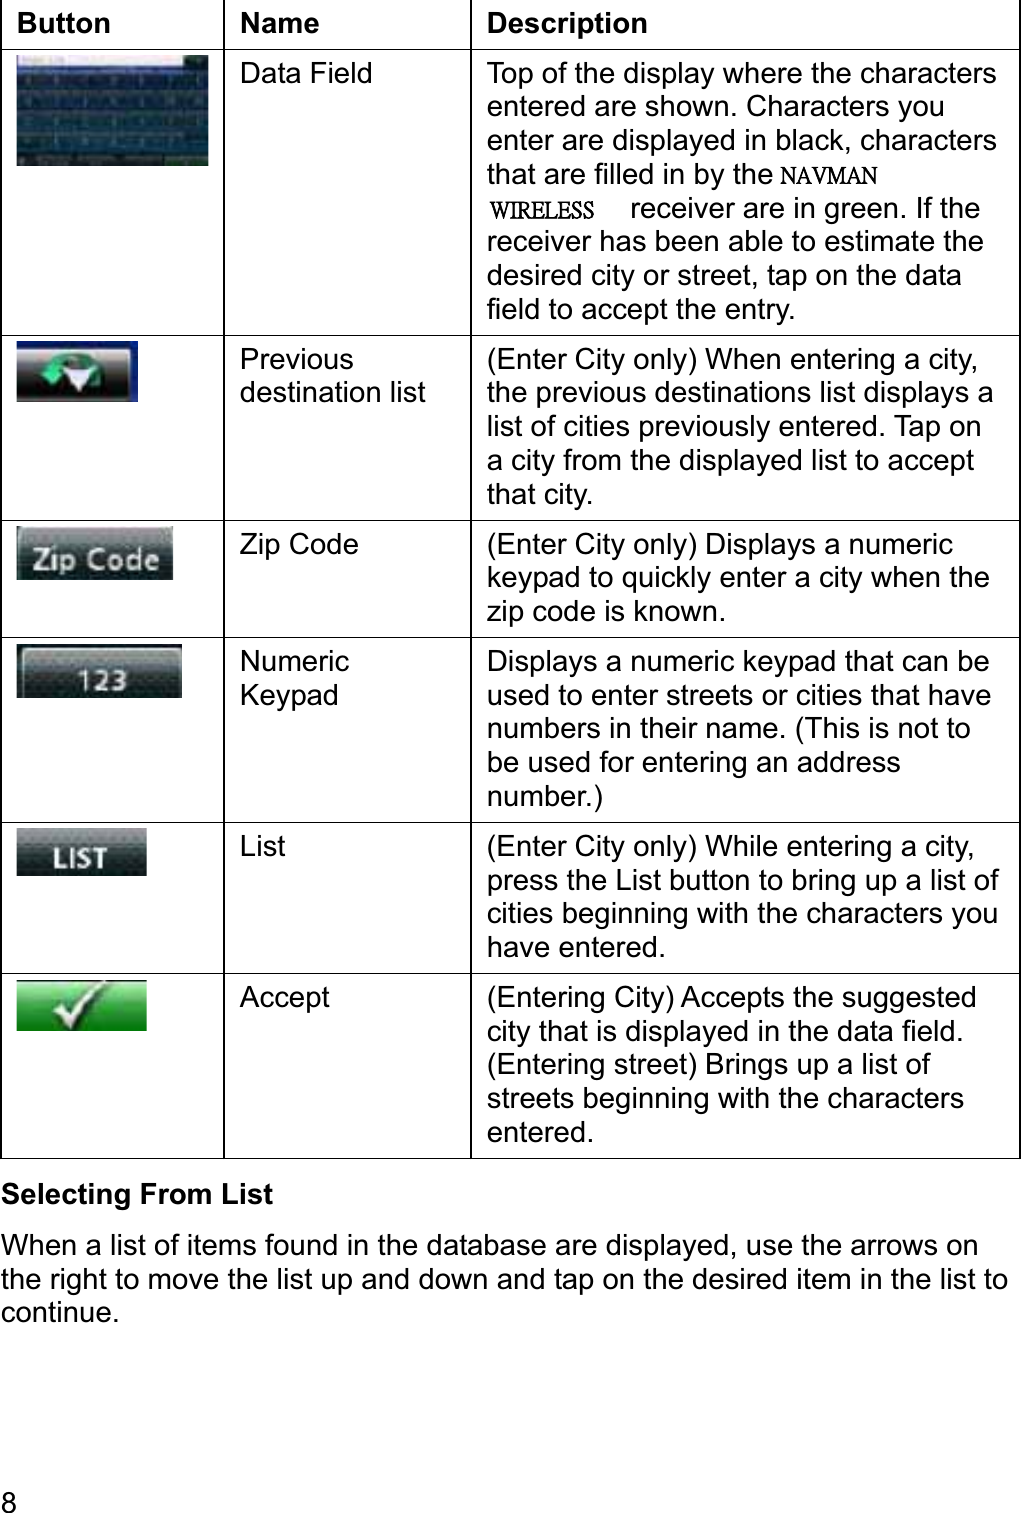 8Button Name  Description Data Field  Top of the display where the characters entered are shown. Characters you enter are displayed in black, characters that are filled in by the Magellan RoadMate receiver are in green. If the receiver has been able to estimate the desired city or street, tap on the data field to accept the entry. Previousdestination list (Enter City only) When entering a city, the previous destinations list displays a list of cities previously entered. Tap on a city from the displayed list to accept that city. Zip Code  (Enter City only) Displays a numeric keypad to quickly enter a city when the zip code is known. Numeric Keypad Displays a numeric keypad that can be used to enter streets or cities that have numbers in their name. (This is not to be used for entering an address number.) List  (Enter City only) While entering a city, press the List button to bring up a list of cities beginning with the characters you have entered. Accept  (Entering City) Accepts the suggested city that is displayed in the data field. (Entering street) Brings up a list of streets beginning with the characters entered.Selecting From List When a list of items found in the database are displayed, use the arrows on the right to move the list up and down and tap on the desired item in the list to continue. ˡ˔˩ˠ˔ˡʳʳʳʳ˪˜˥˘˟˘˦˦